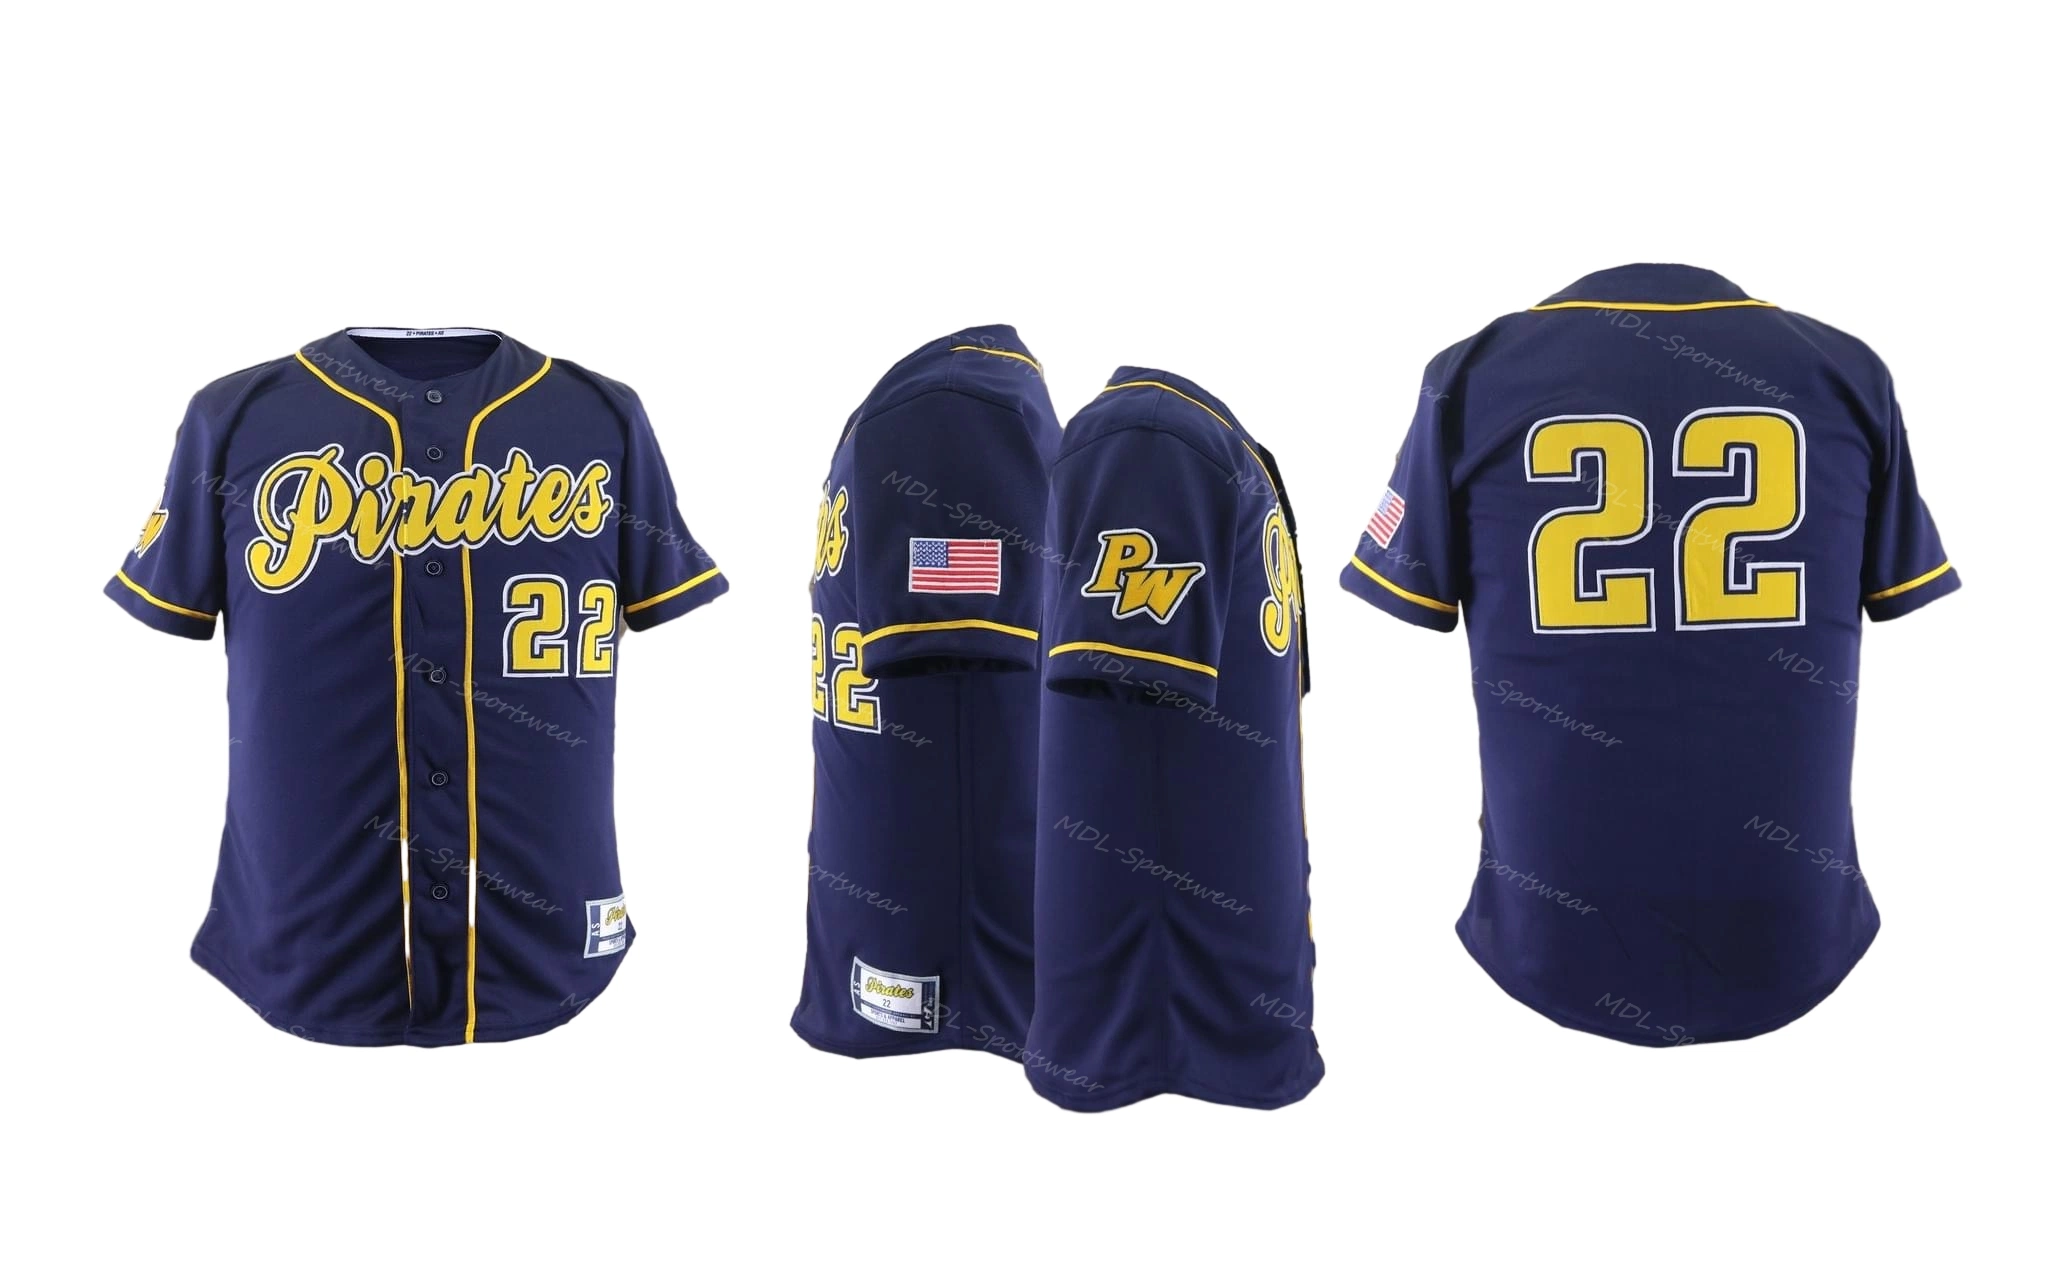 Custom Color Women's High quality/High cost performance  Stitched Baseball Jersey Sets